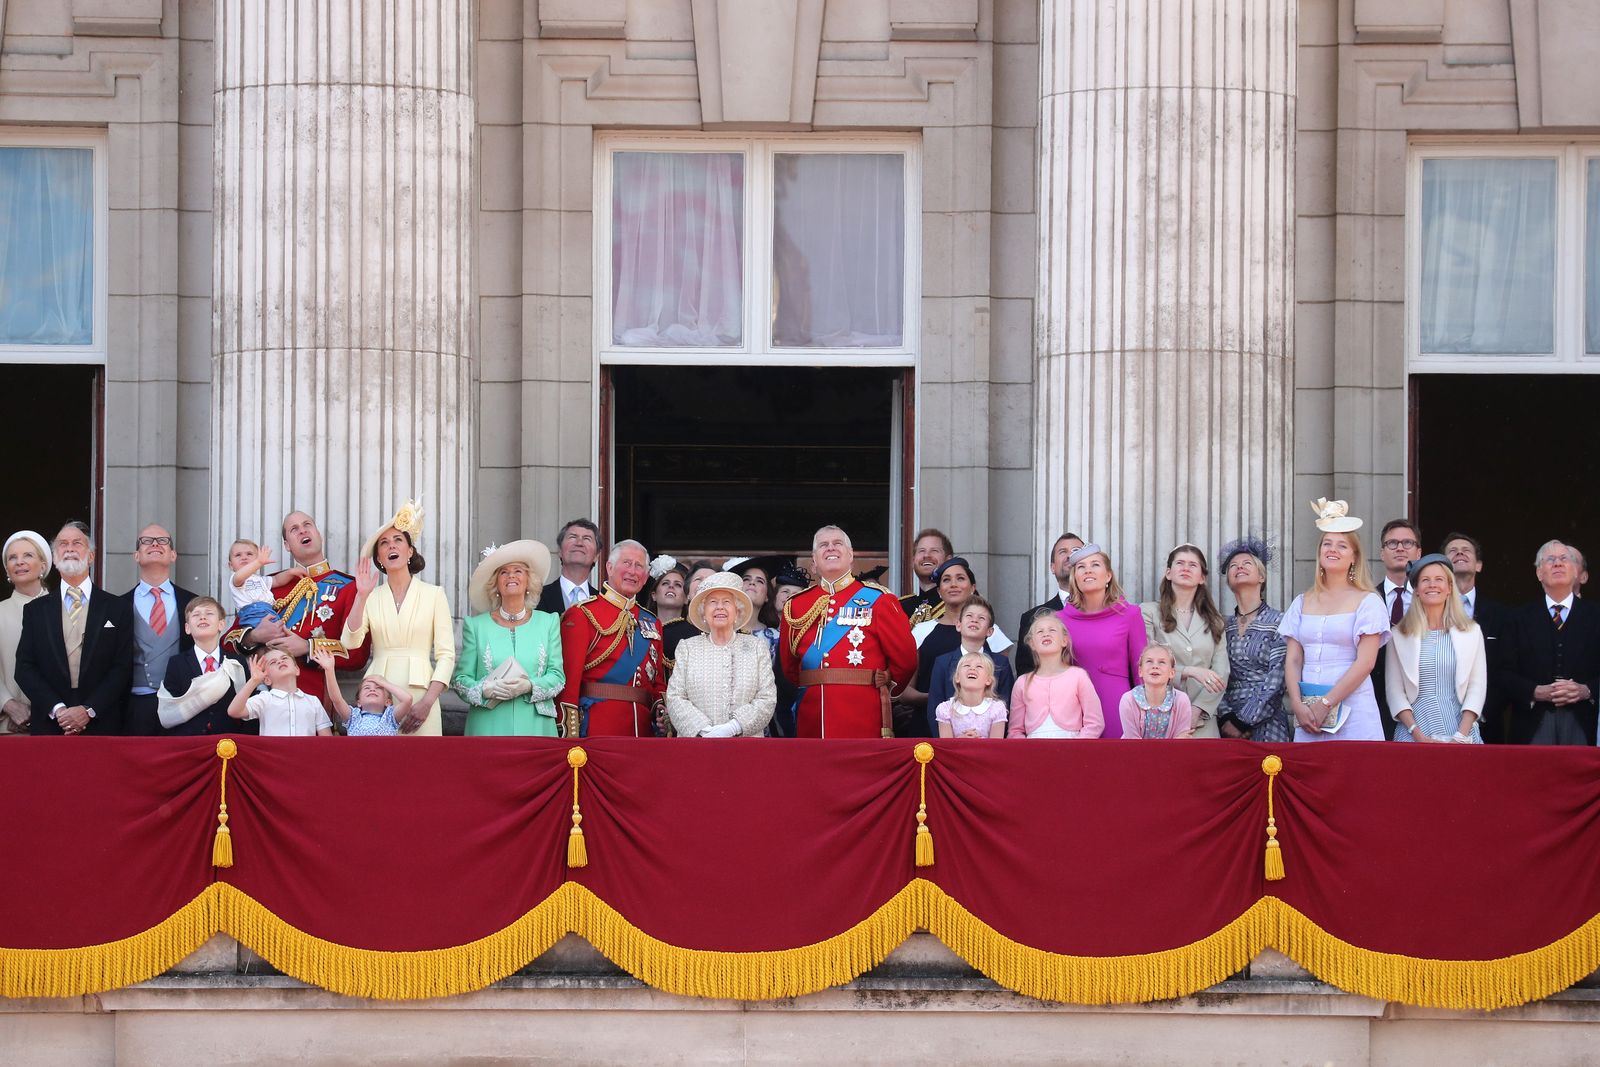 The Royal Family on the balcony of Buckingham Palace to watch a fly-past of aircraft by the Royal Air Force during Trooping The Colour, the Queen's annual birthday parade, on June 08, 2019. | Getty Images